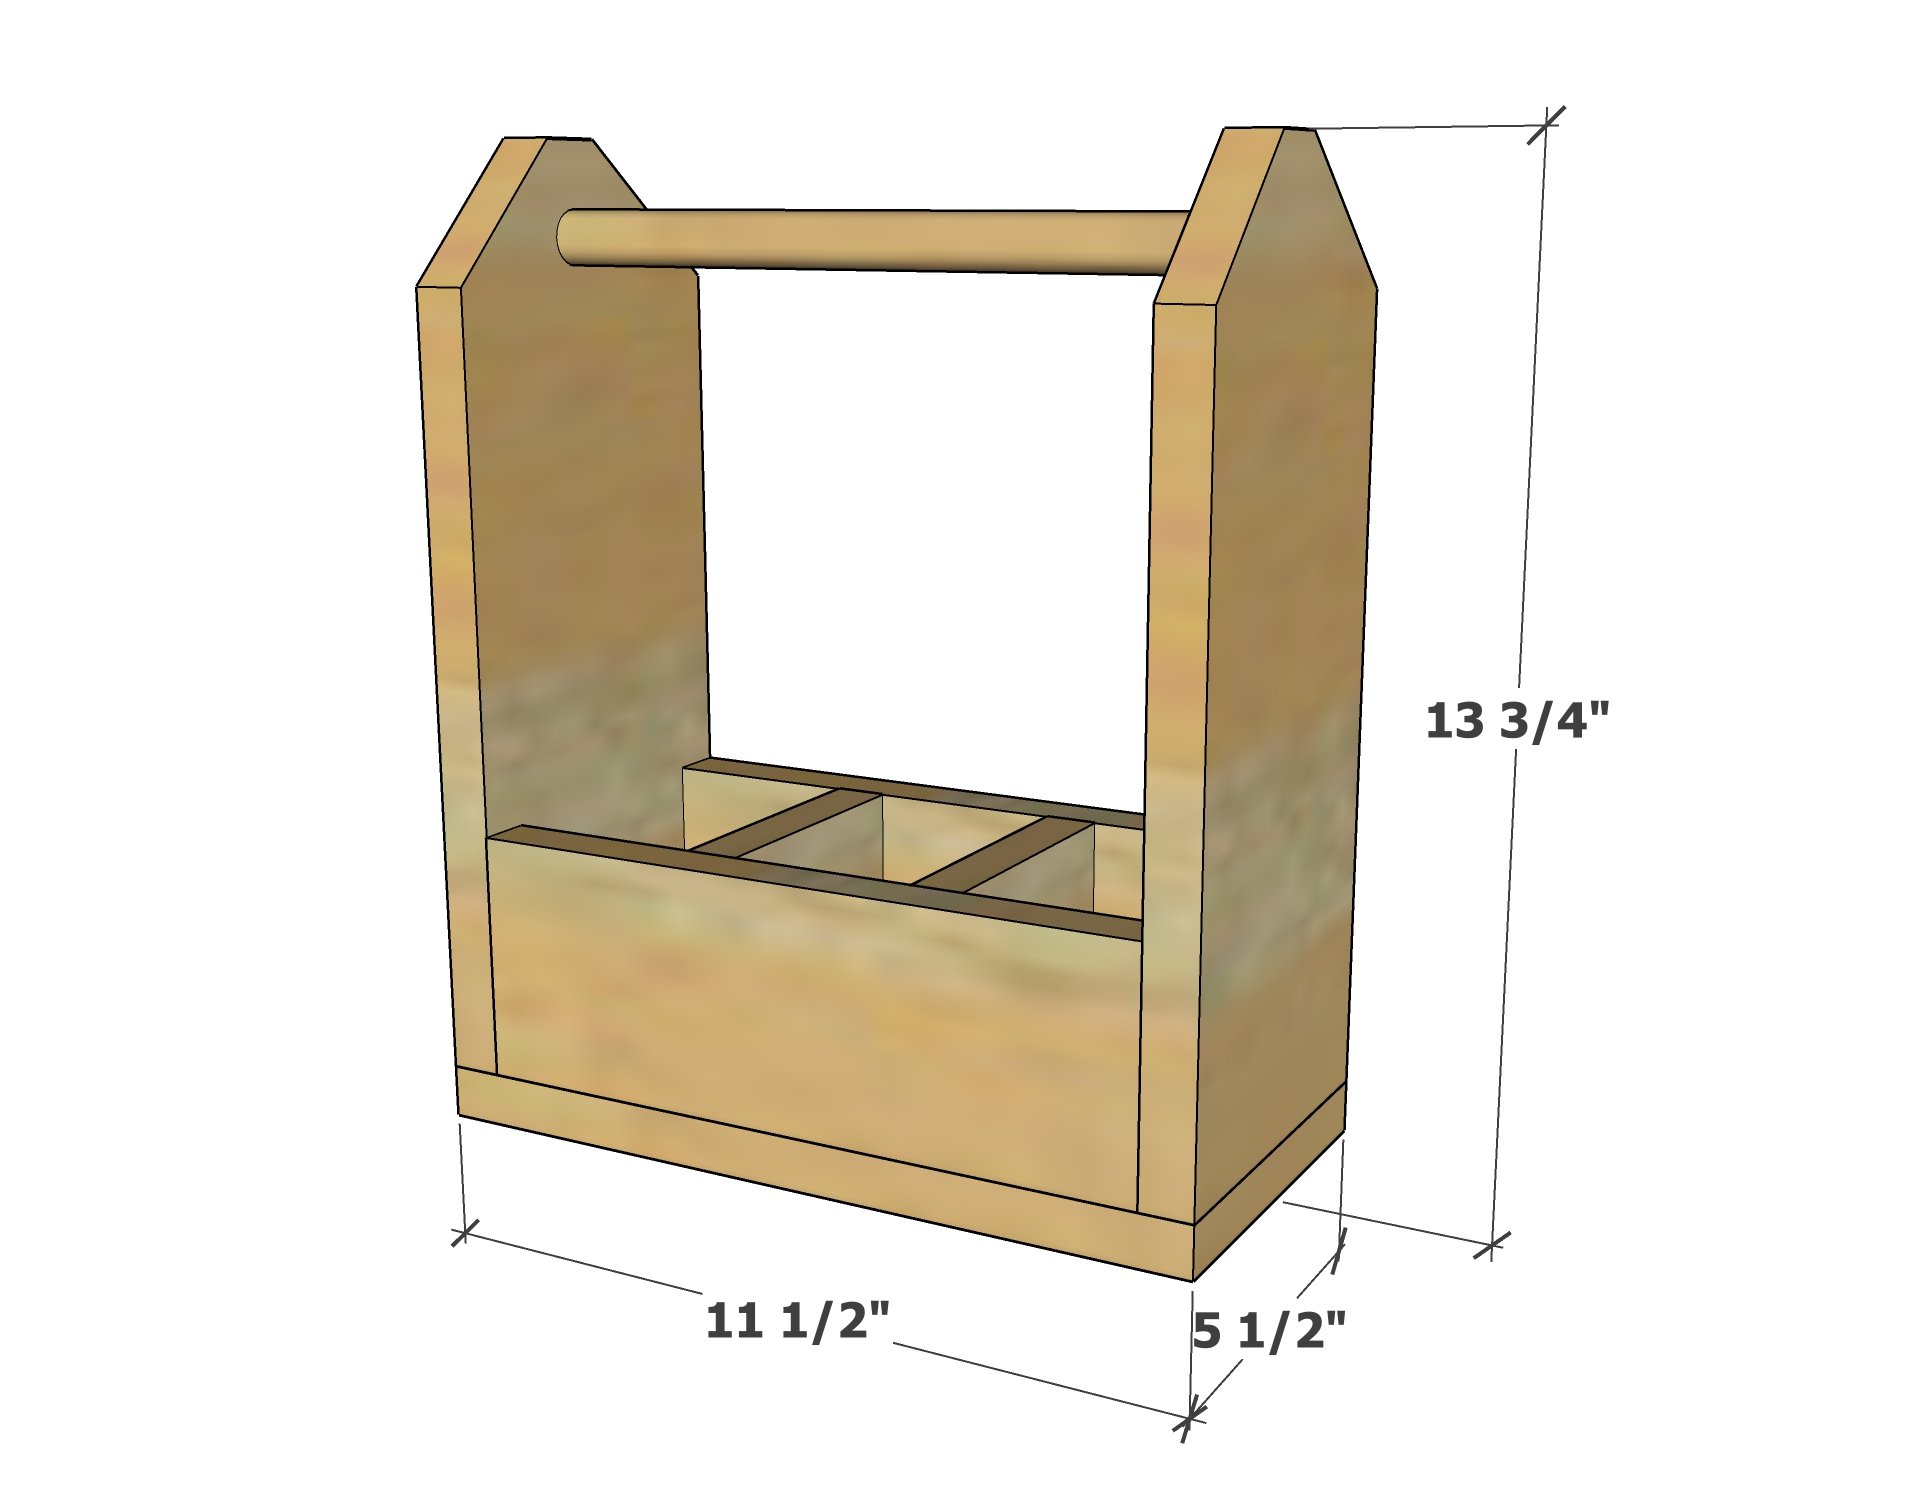 dimensions of bottle caddy plans